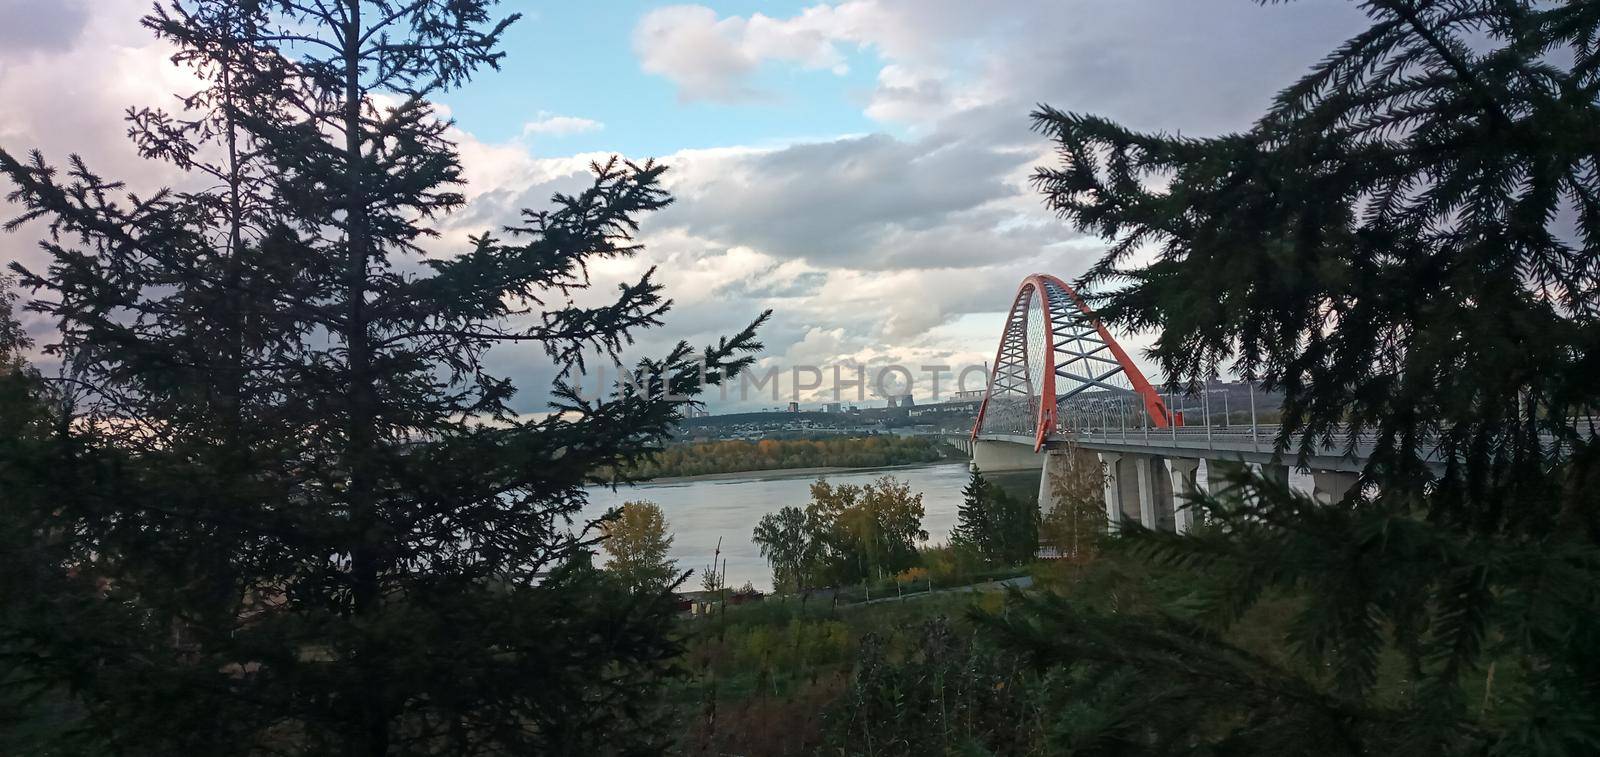 Red arch of the cable-stayed suspension bridge over the wide Ob River. Novosibirsk, Russia. by Rina_Dozornaya